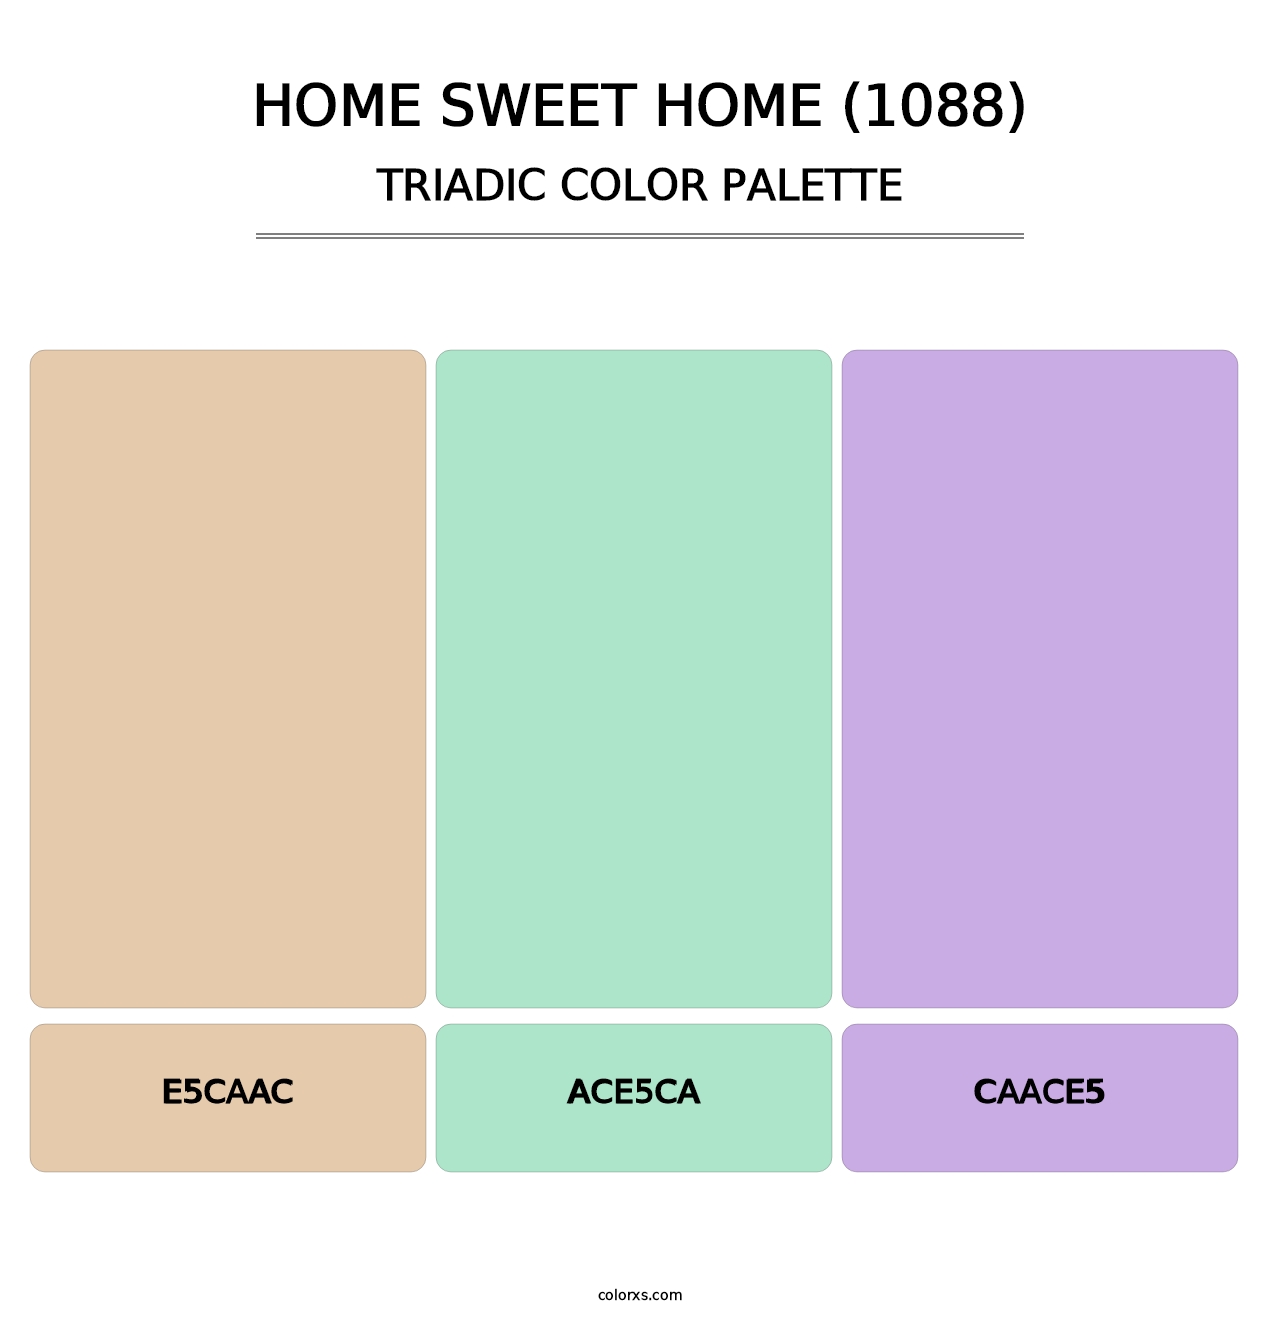 Home Sweet Home (1088) - Triadic Color Palette